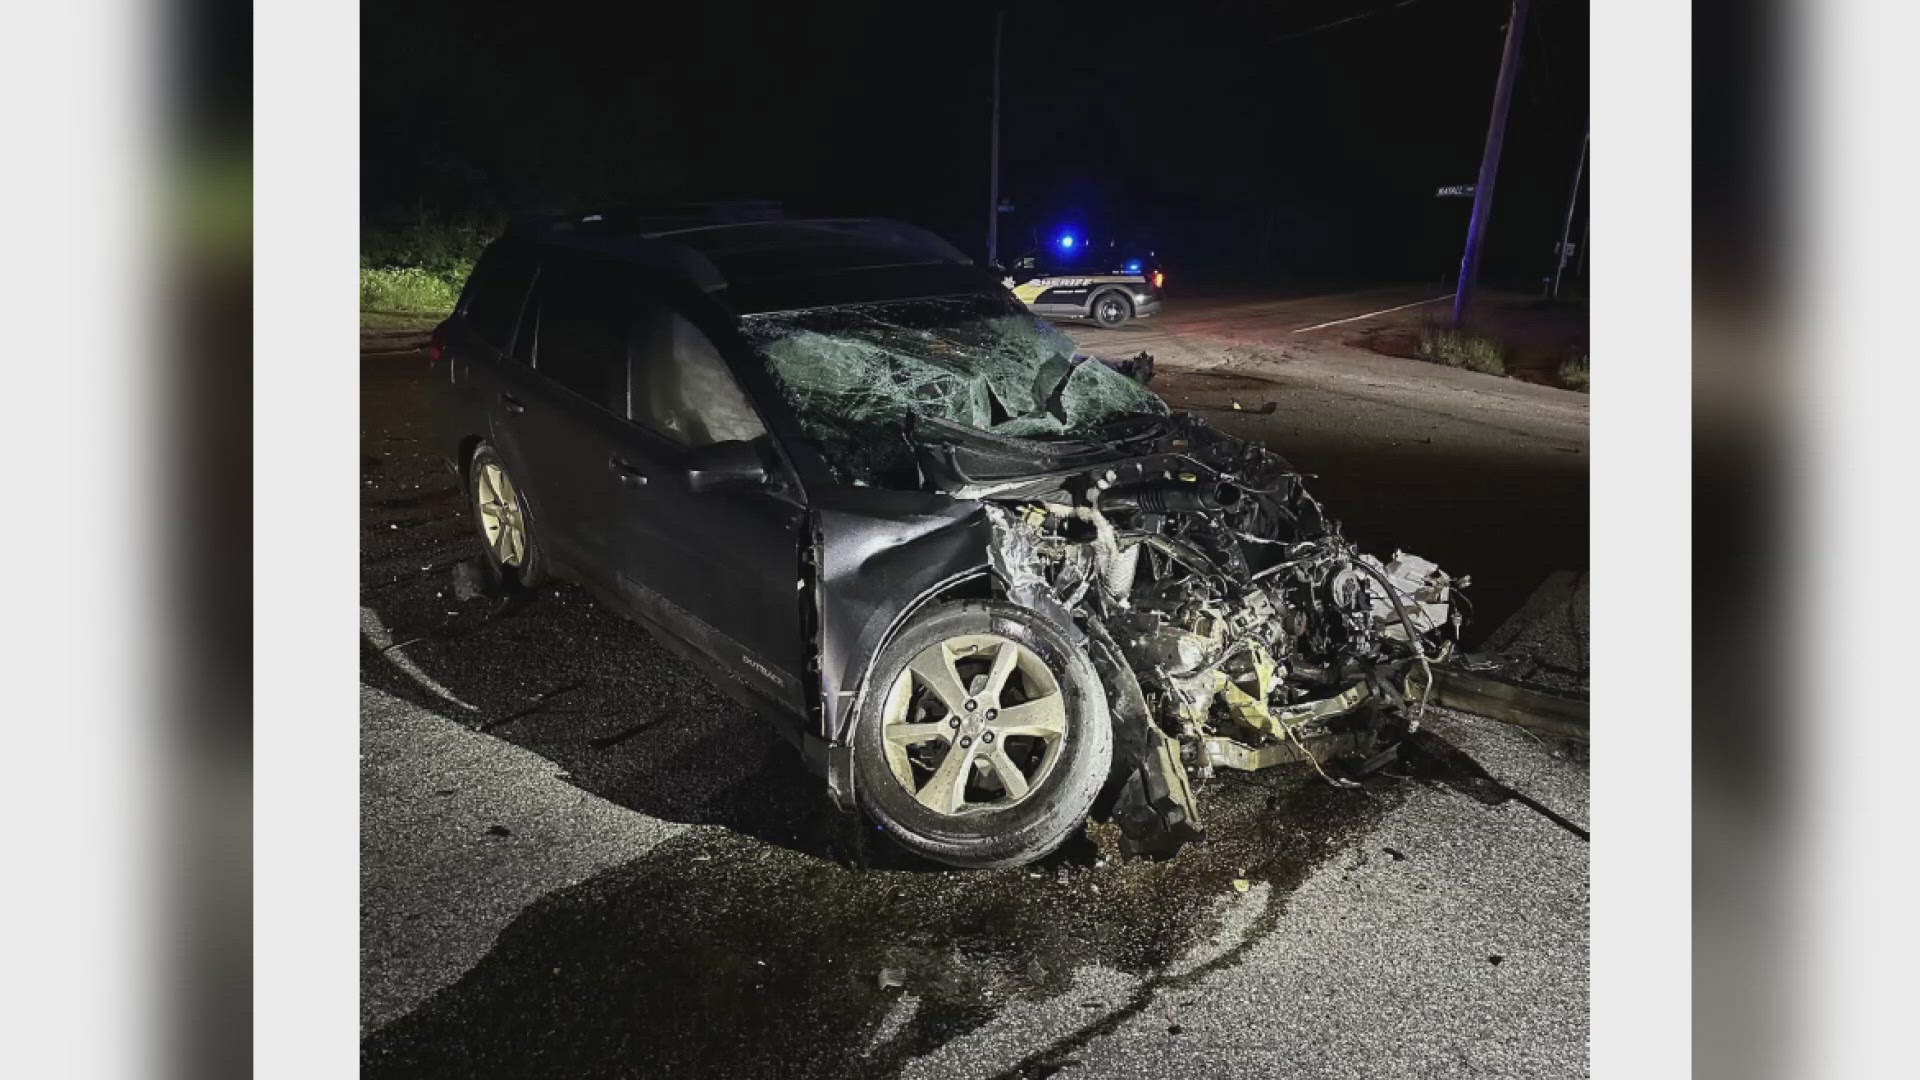 Authorities believe speed and alcohol factored into the crash, according to the Cumberland County Sheriff's Office.